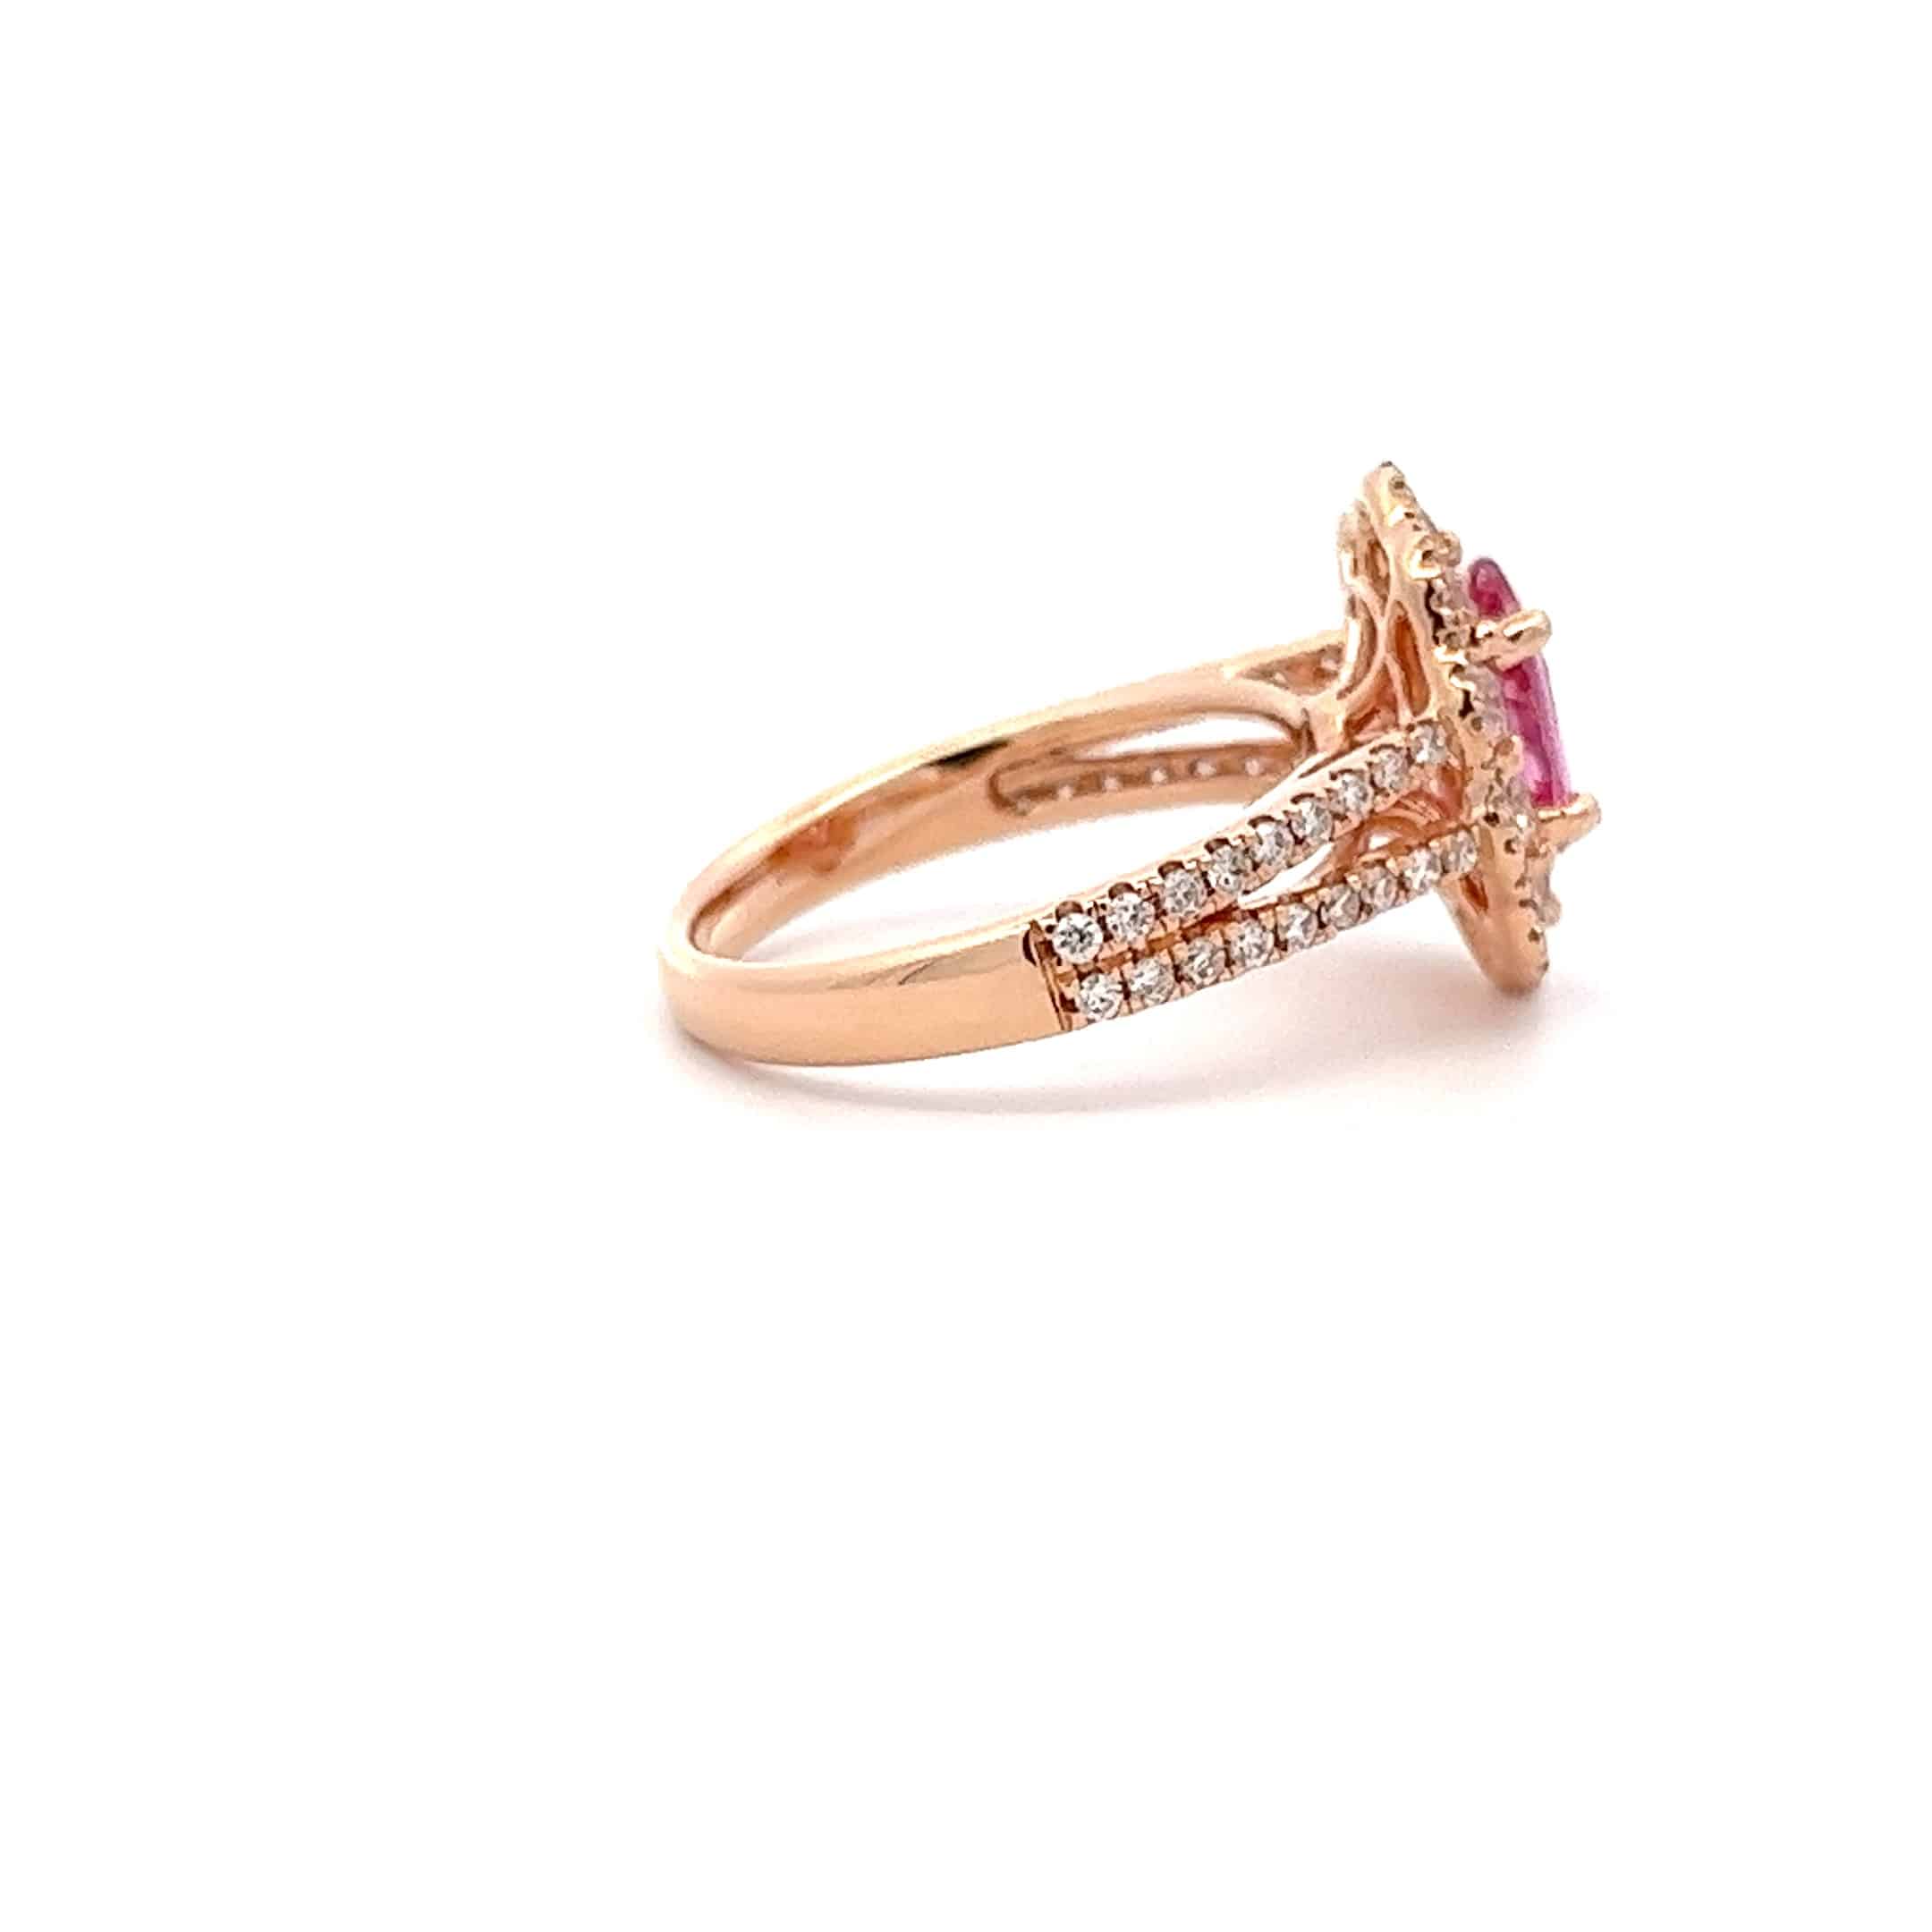 1.31ct Oval Pink Sapphire Ring with Diamond Halo in 18ct Rose Gold